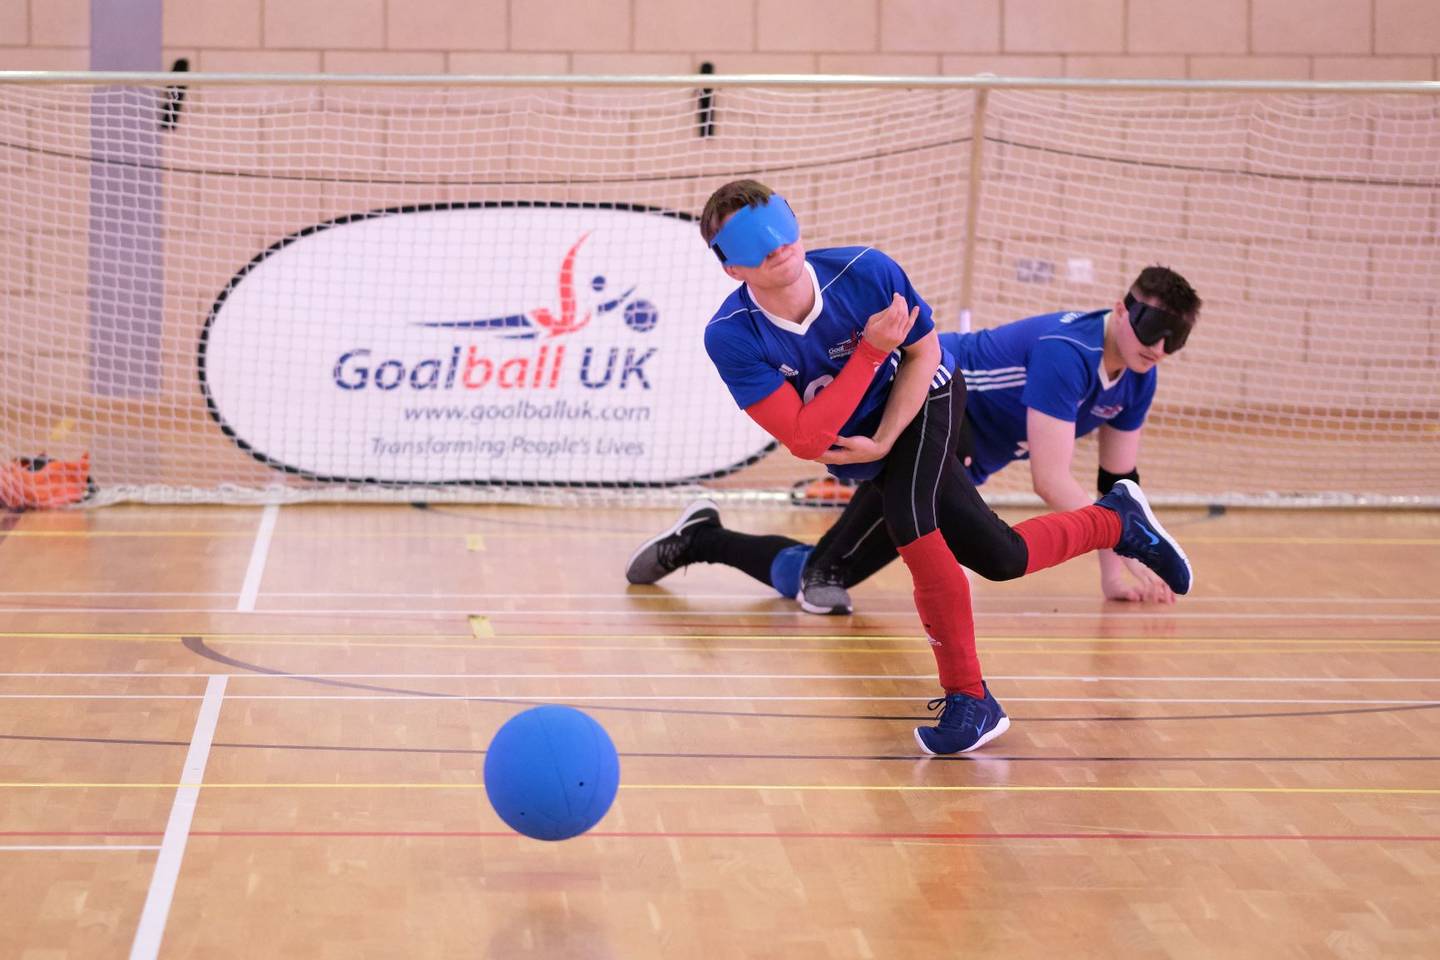 Two people playing Goalball 